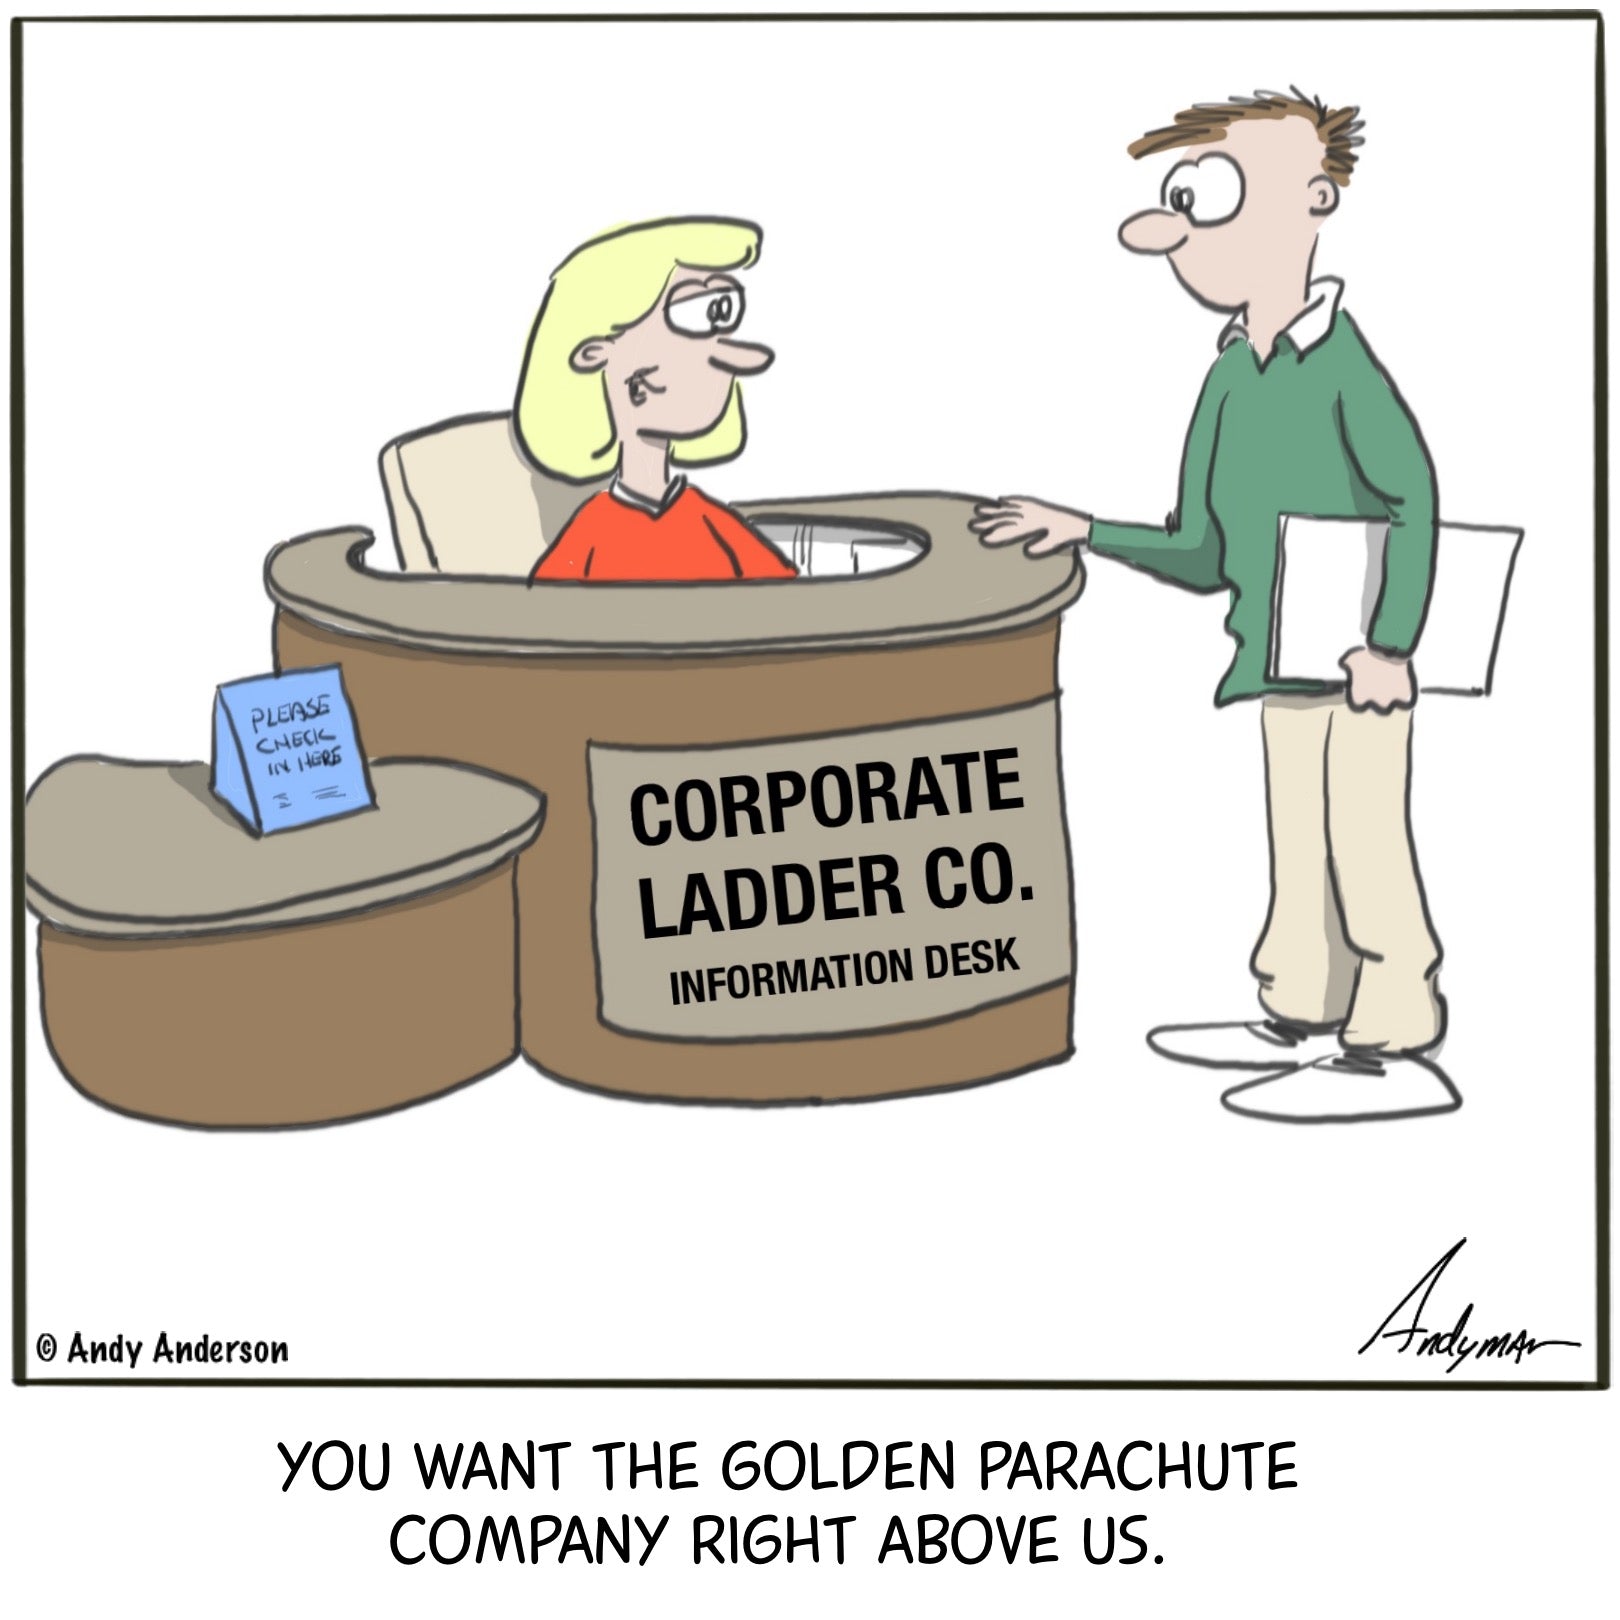 Cartoon about the golden parachute company being above the corporate ladder company